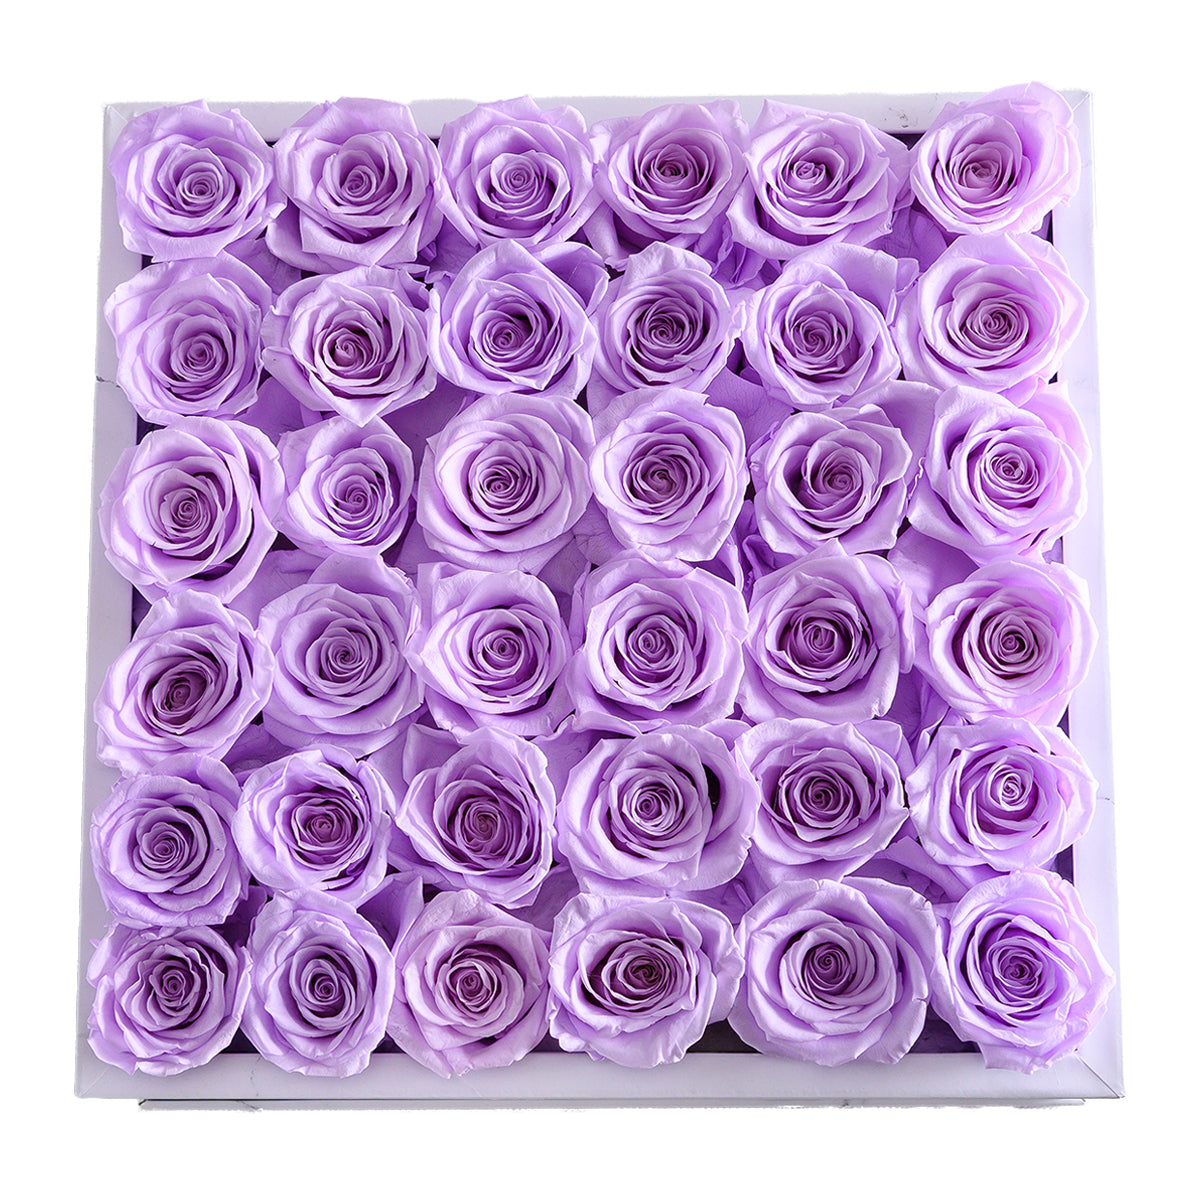 Intense White Marble Lilac 36 | Rose Forever 